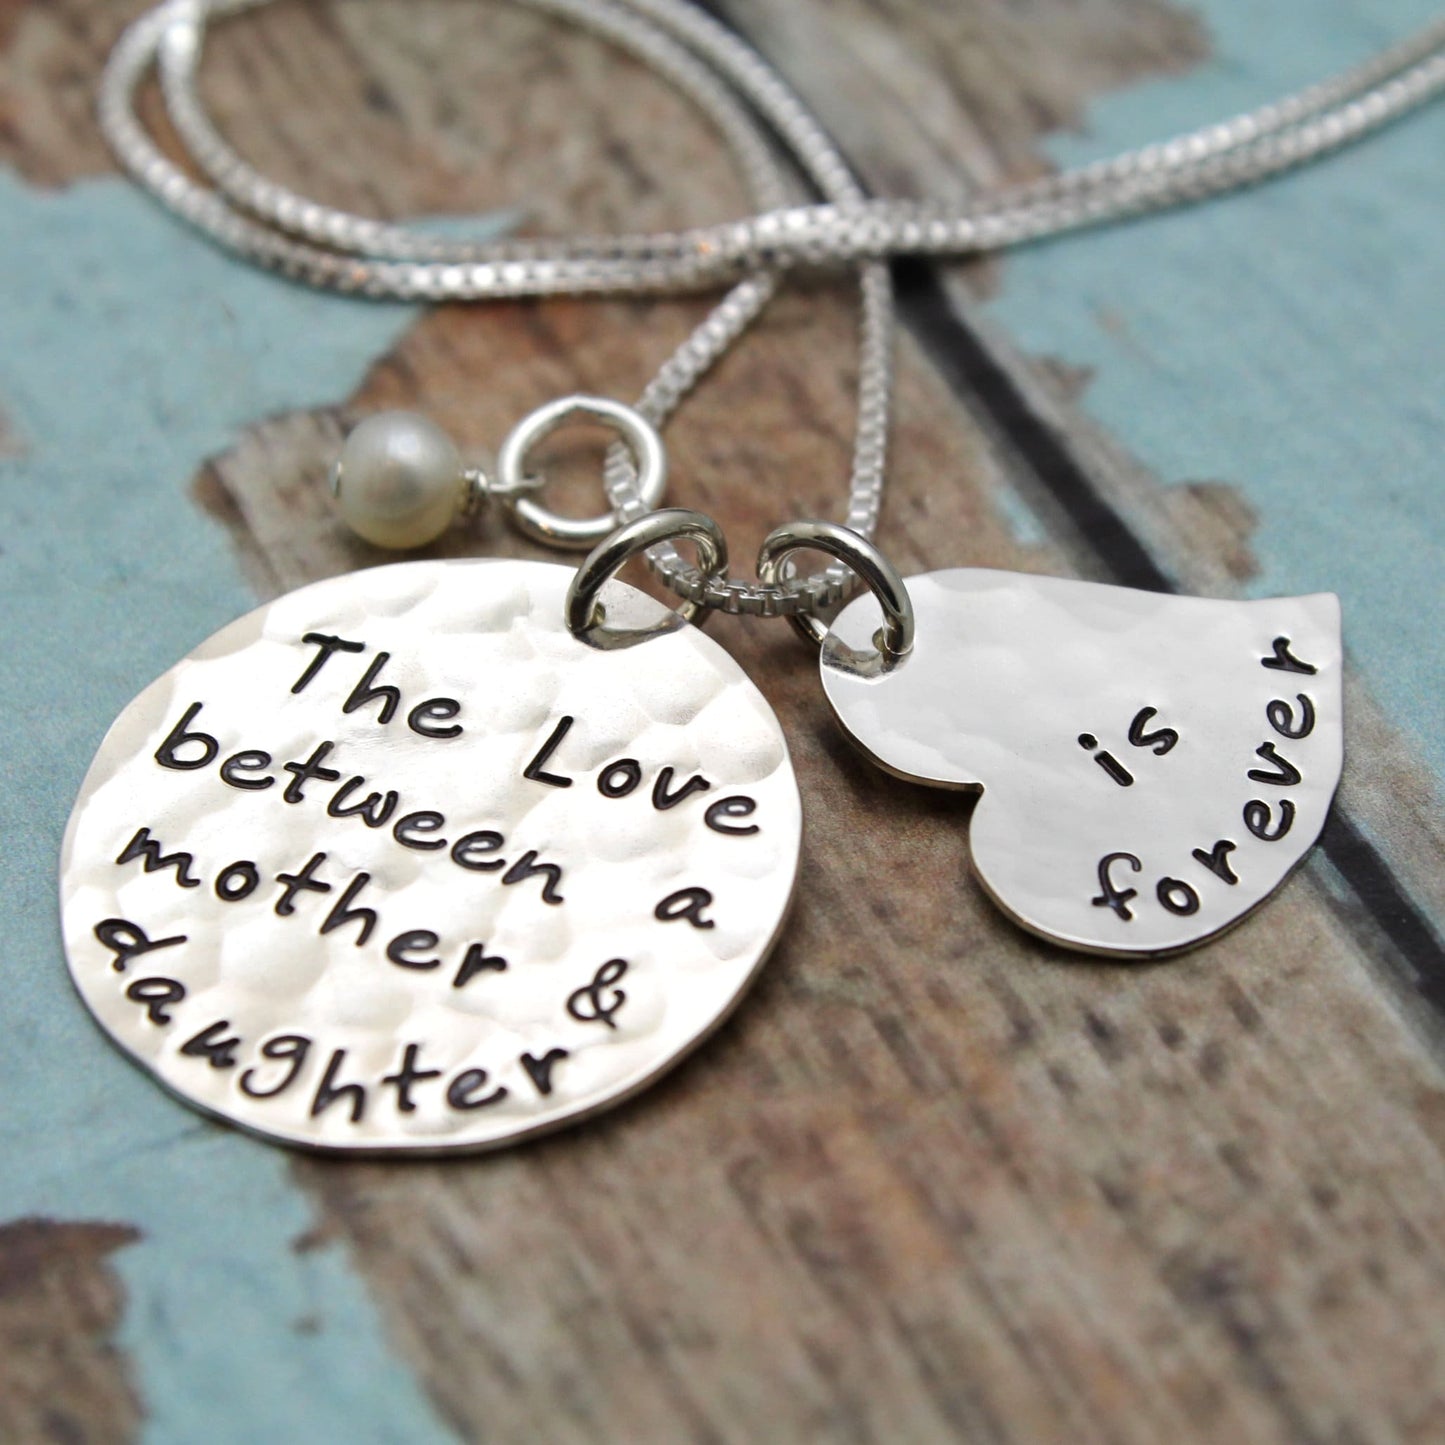 The Love Between a Mother & Daughter is Forever Necklace, Necklace for Mother, Mother's Day Gift, Sterling Silver Hand Stamped Jewelry